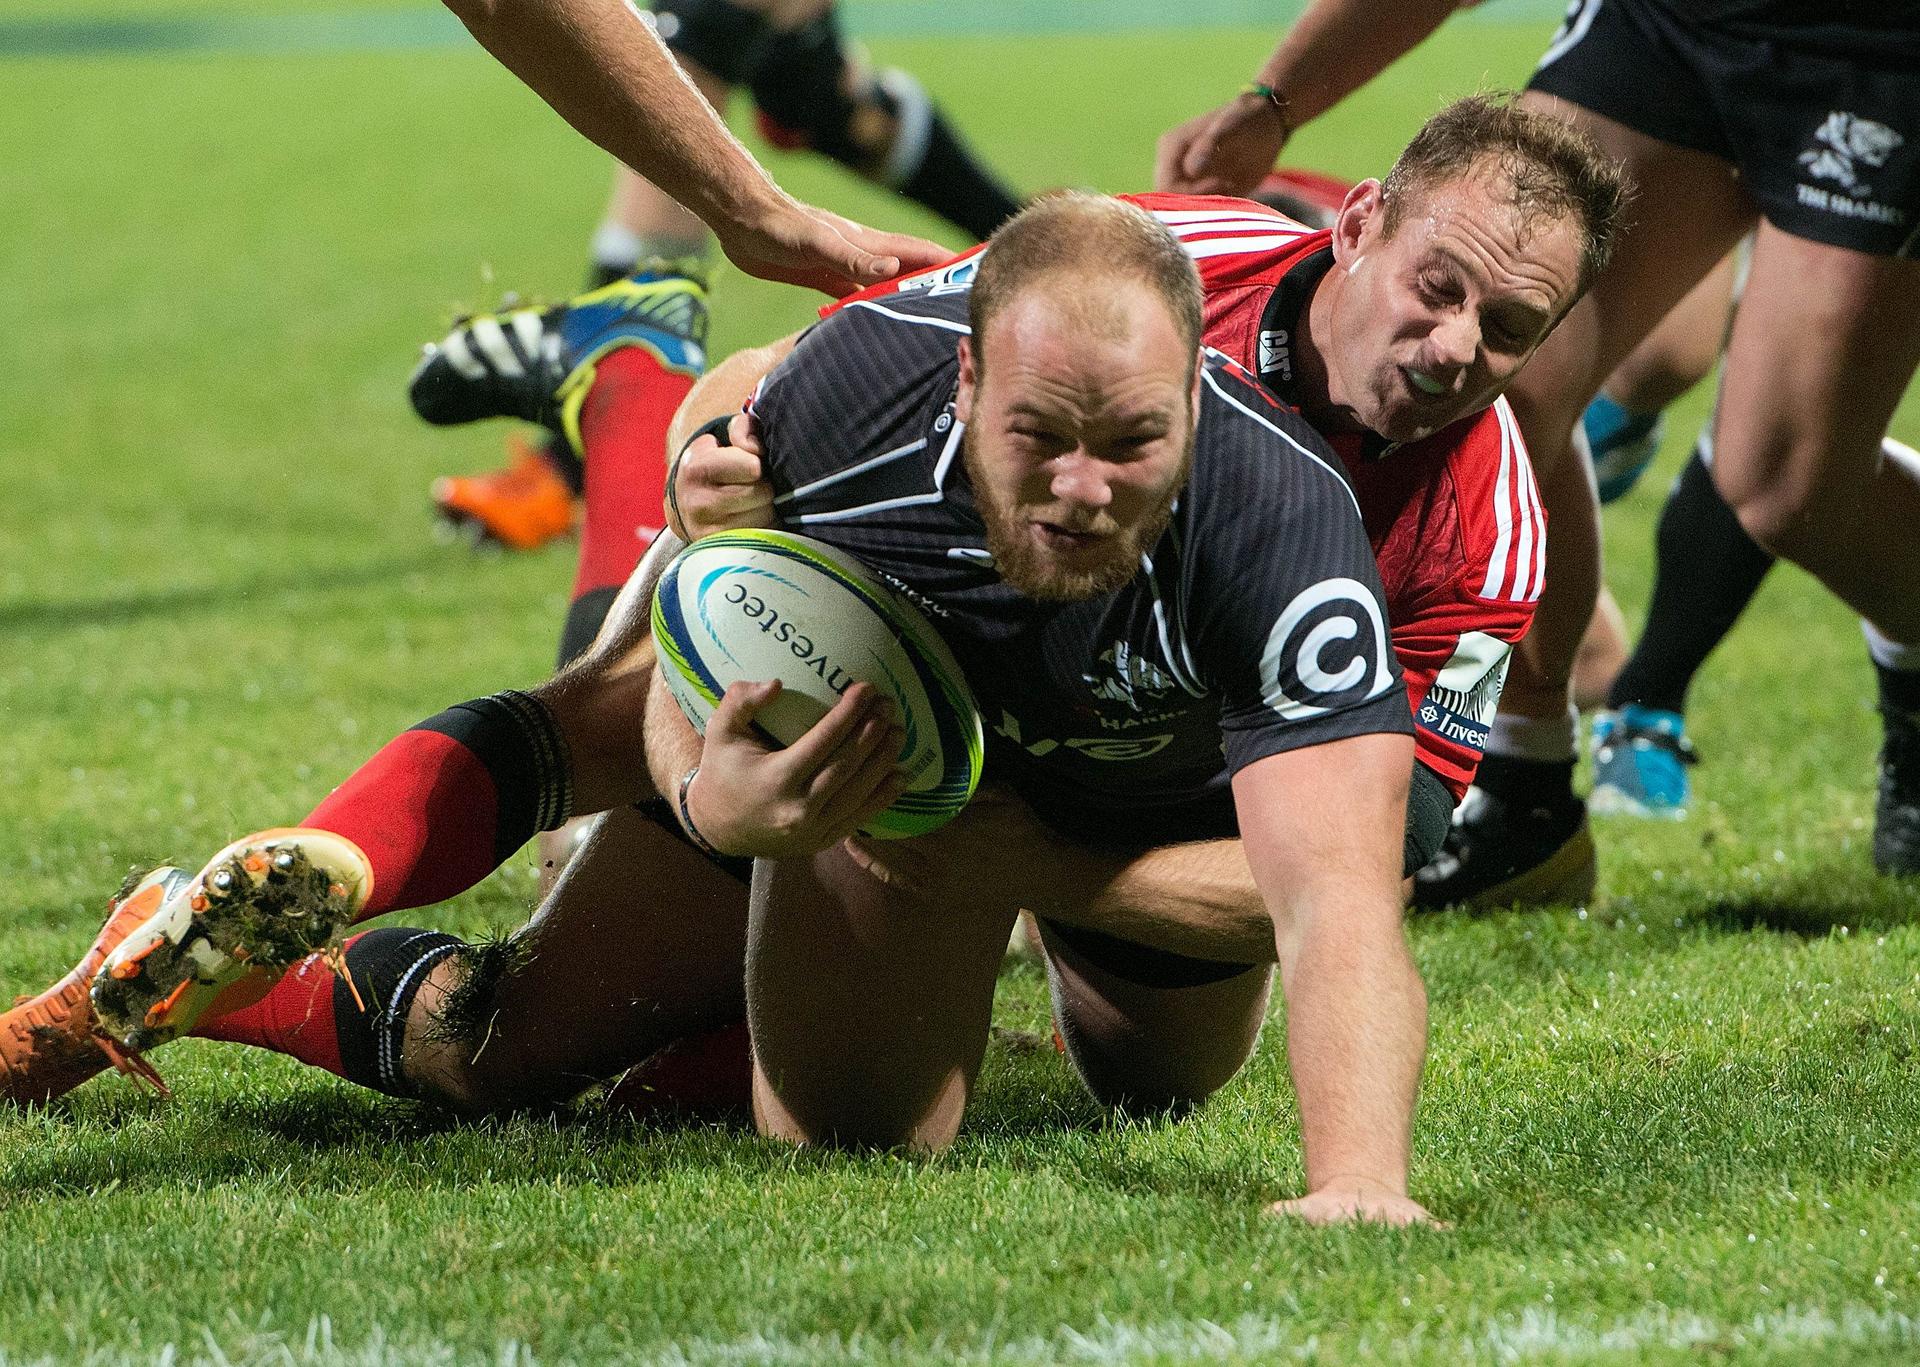 Kyle Cooper of the Coastal Sharks scores a try as he is tackled by Andy Elis of the Crusaders on Saturday at AMI Stadium in Christchurch. Photo: AFP